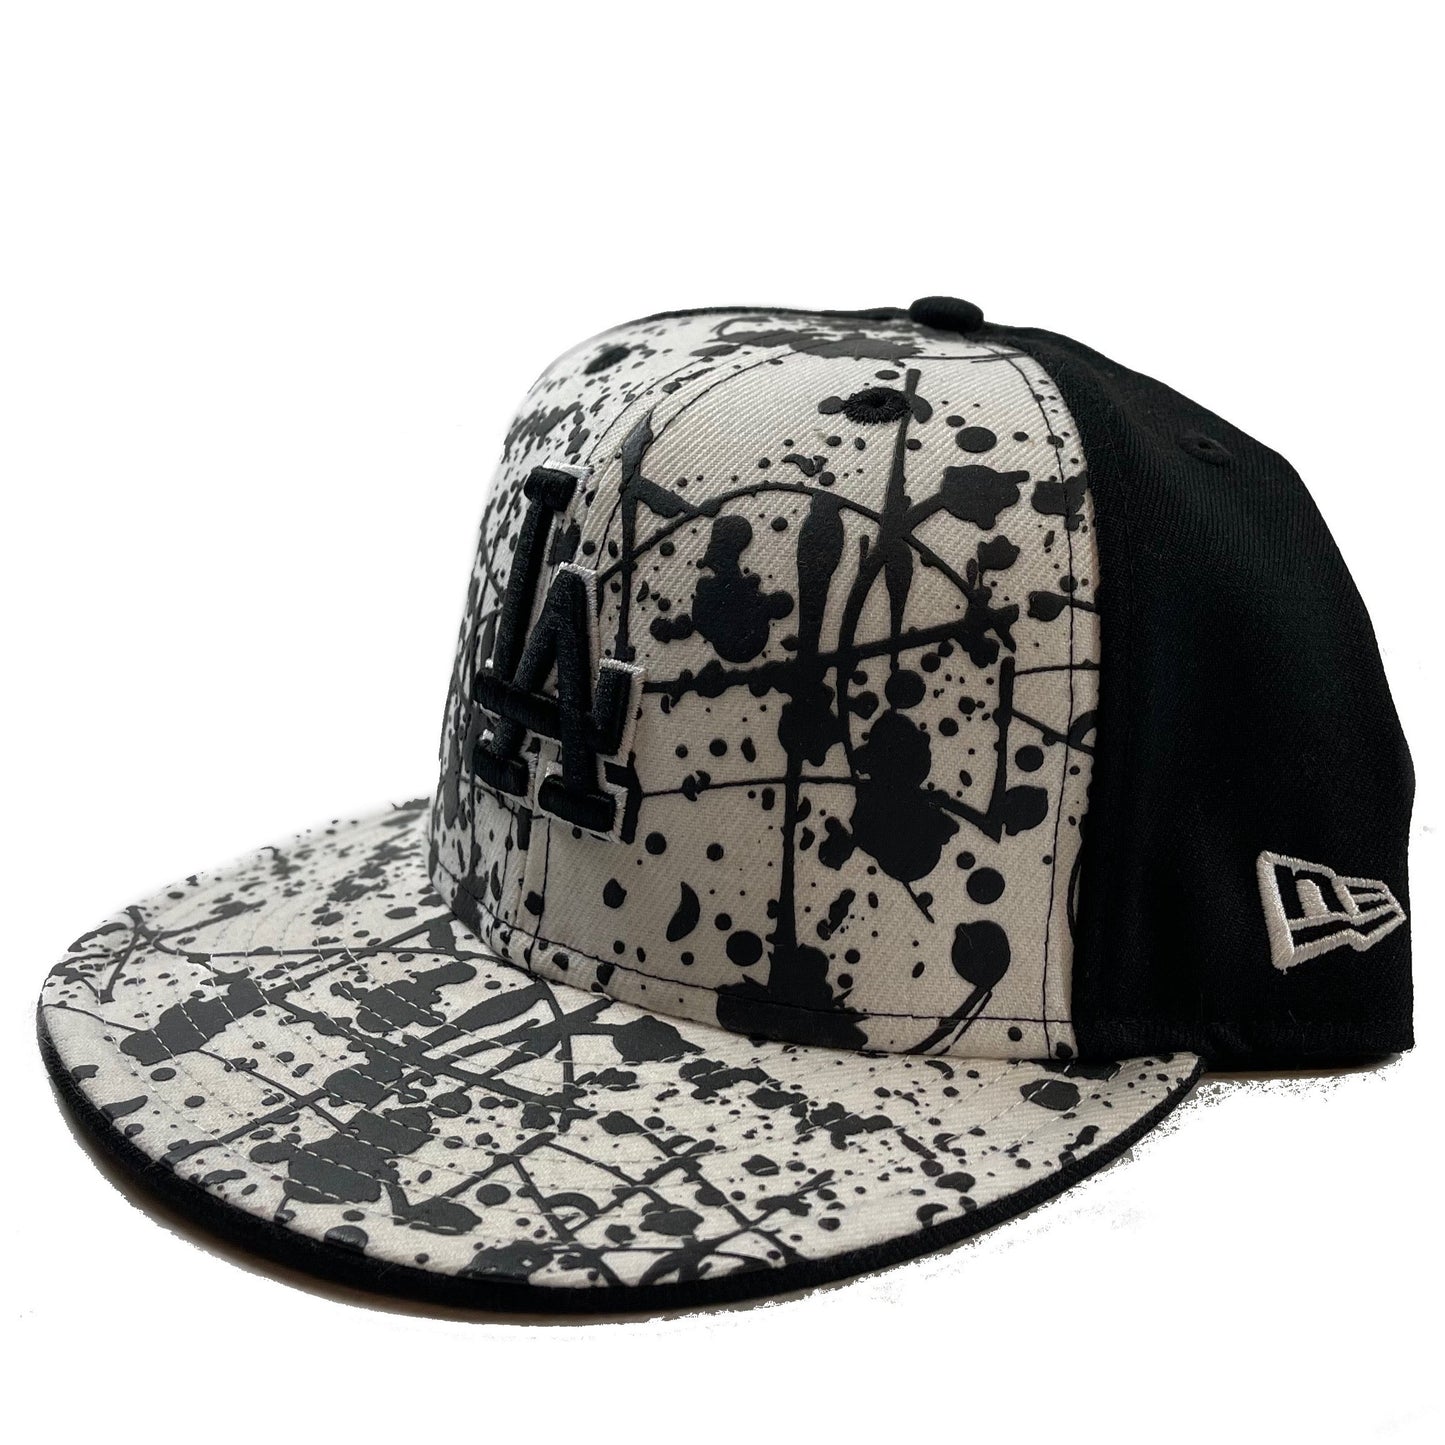 Los Angeles Dodgers Paint Spray (White/Black) Fitted